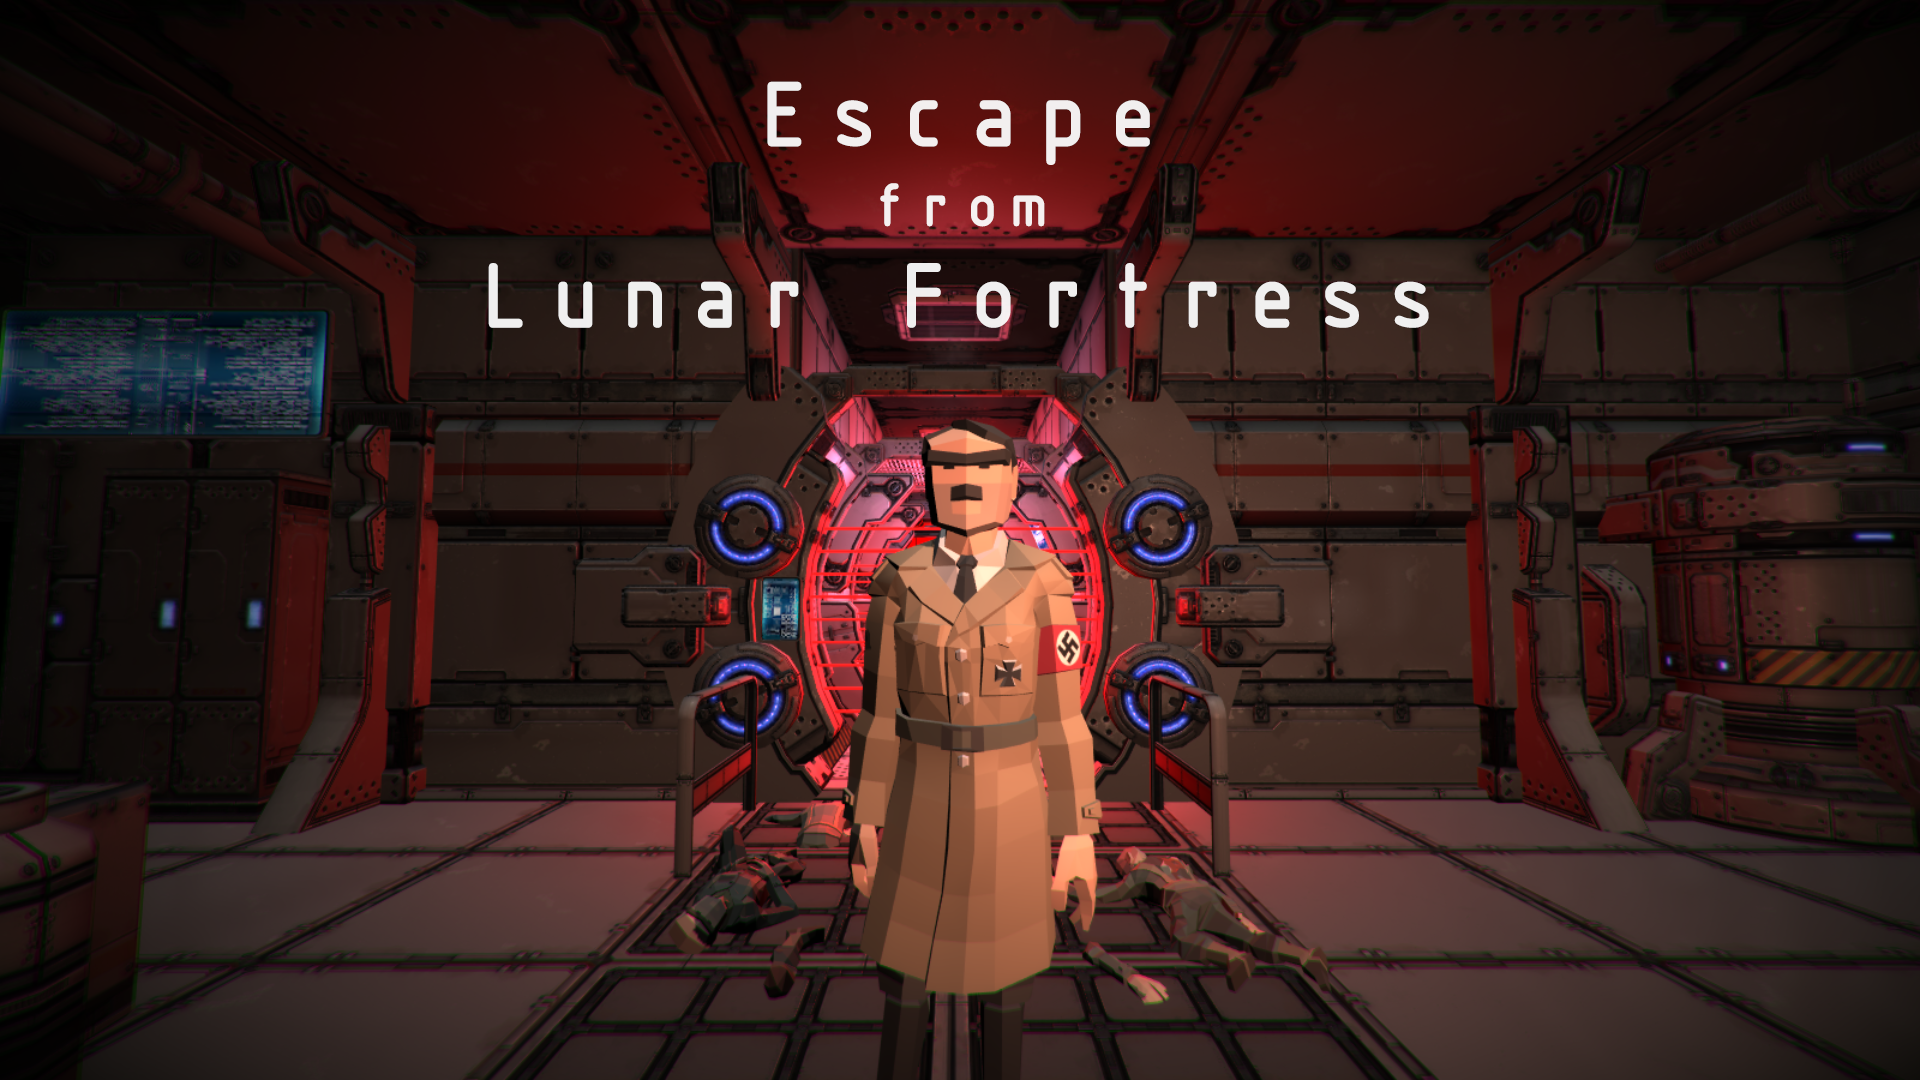 Escape from Lunar Fortress